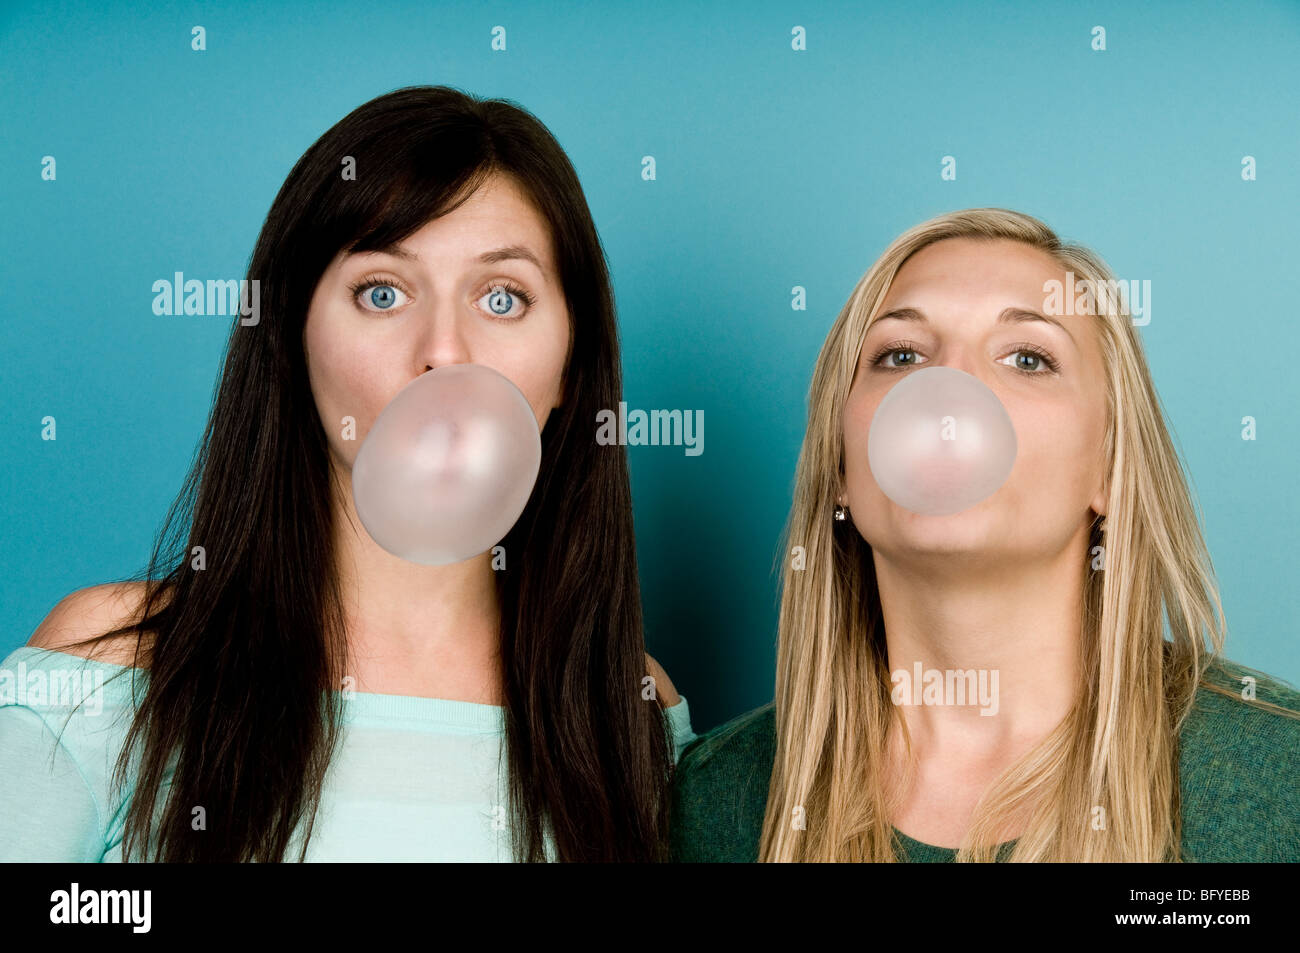 Women blowing bubbles with gum Stock Photo